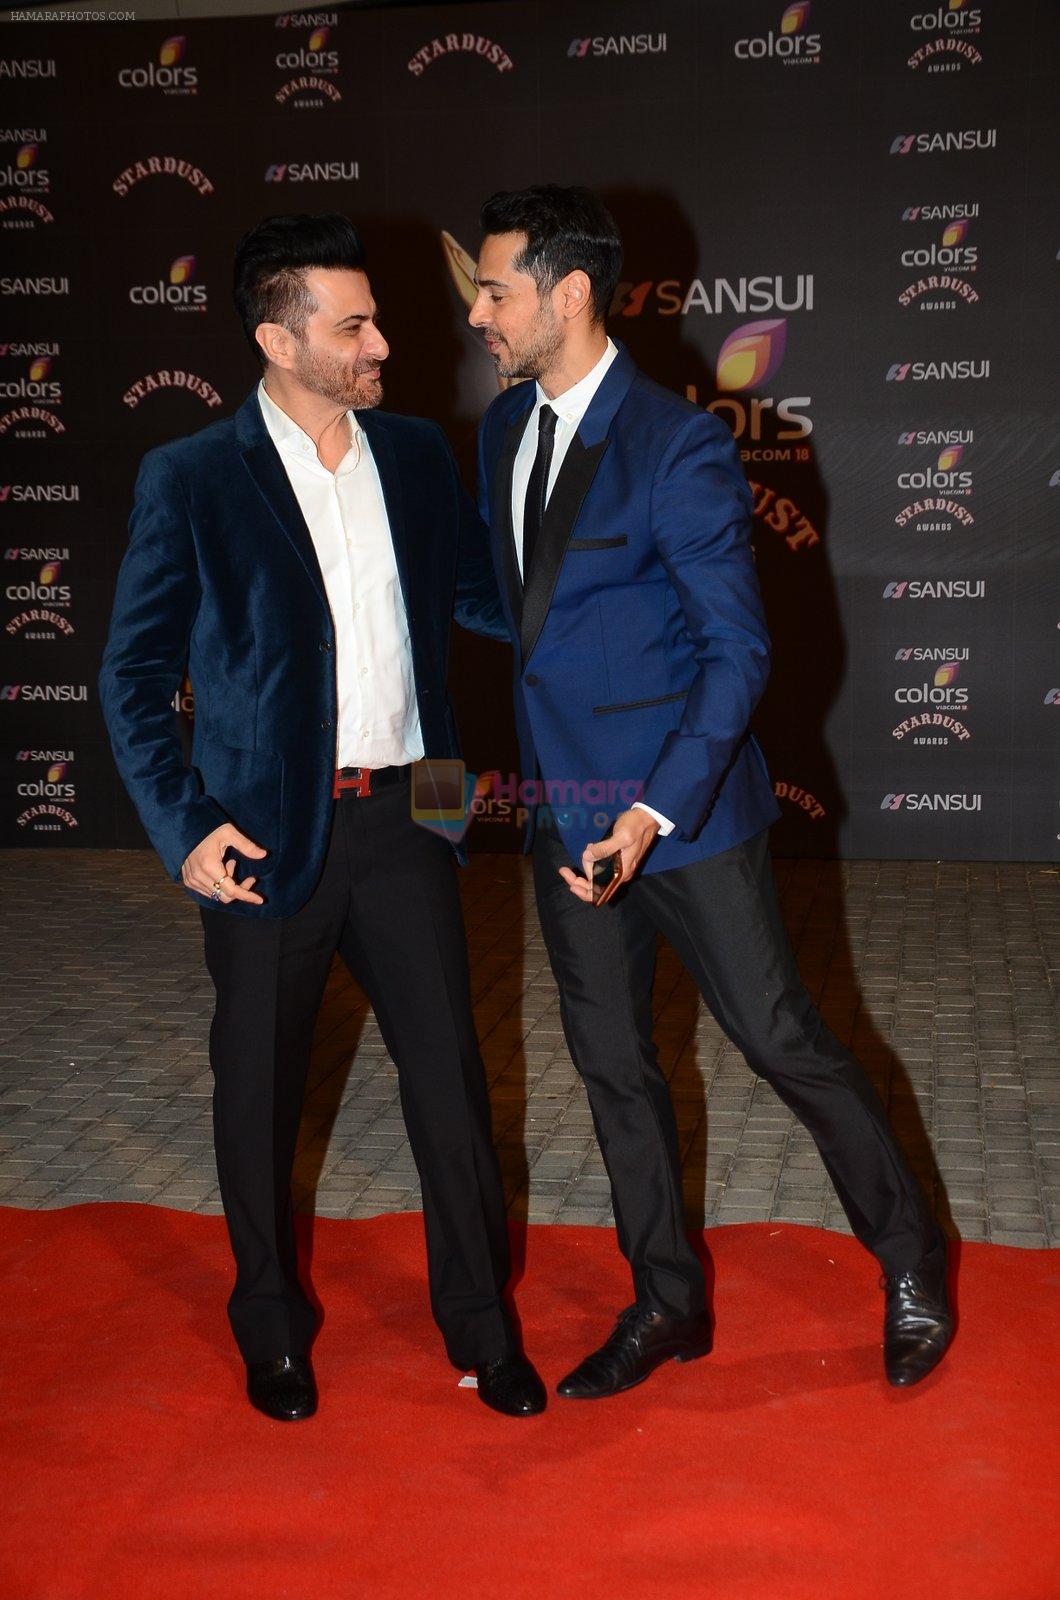 Sanjay Kapoor, Dino Morea at the red carpet of Stardust awards on 21st Dec 2015